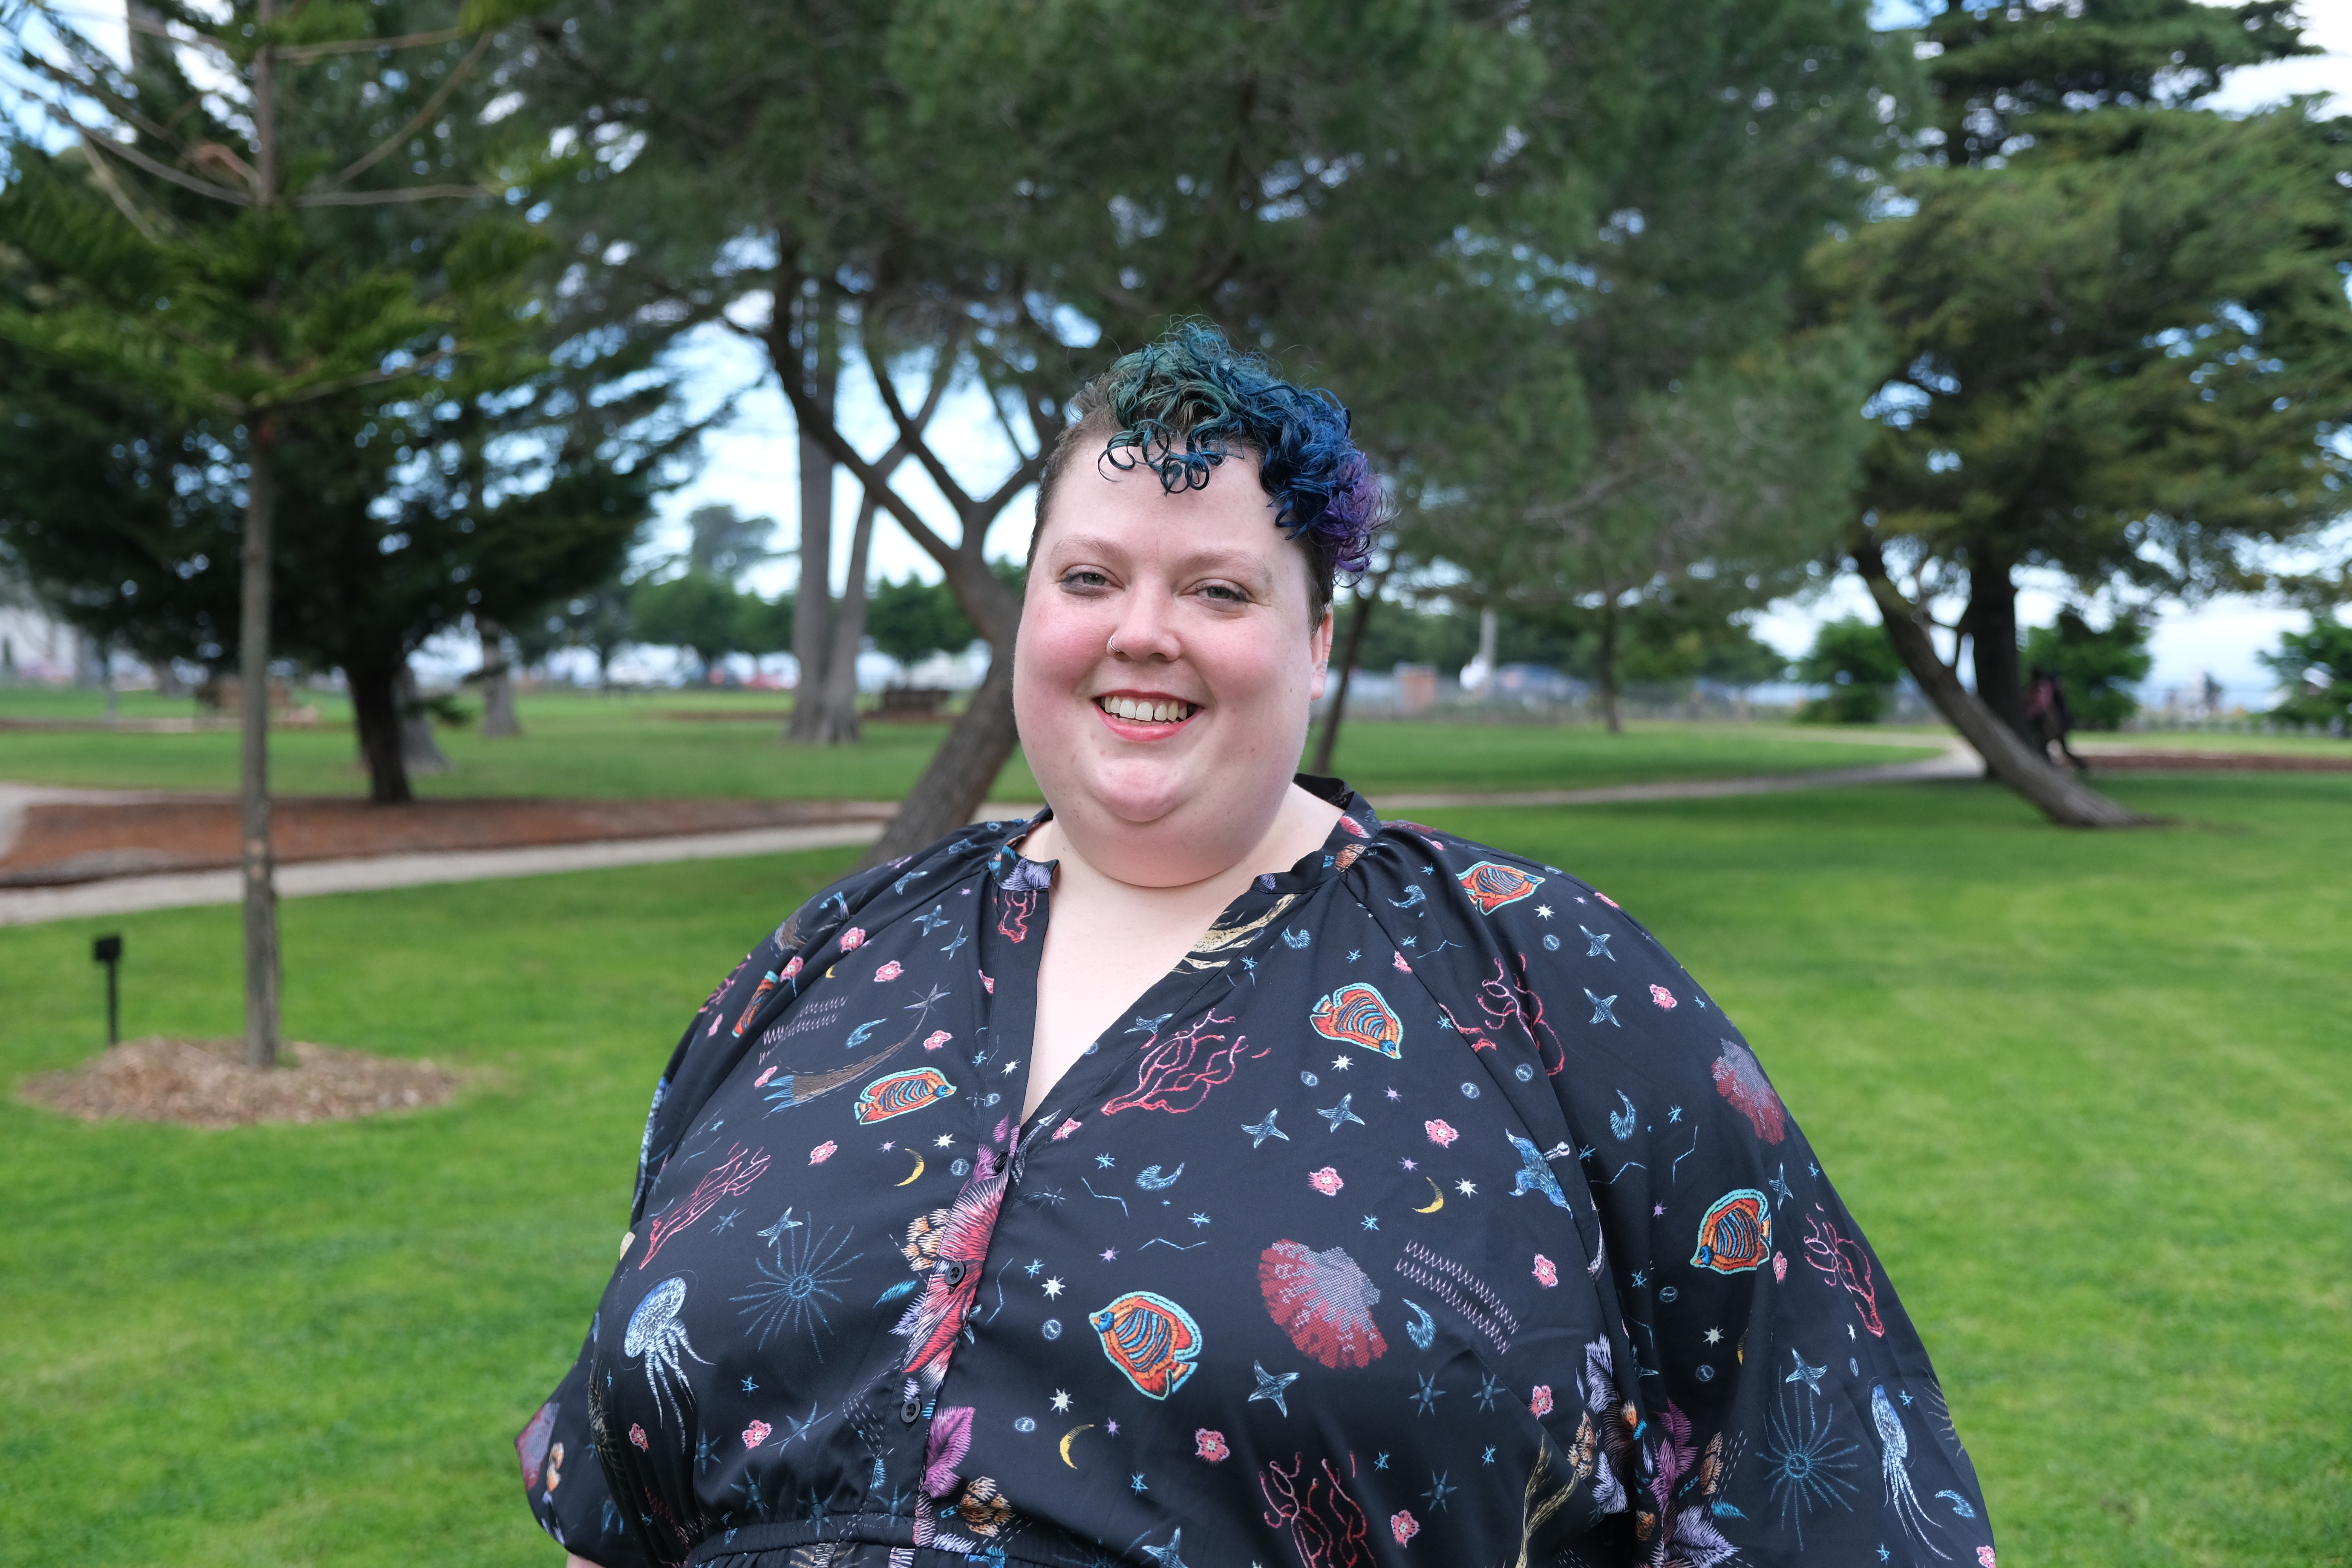 Maggie Ralph standing in front of trees with blue and purple hair smiling